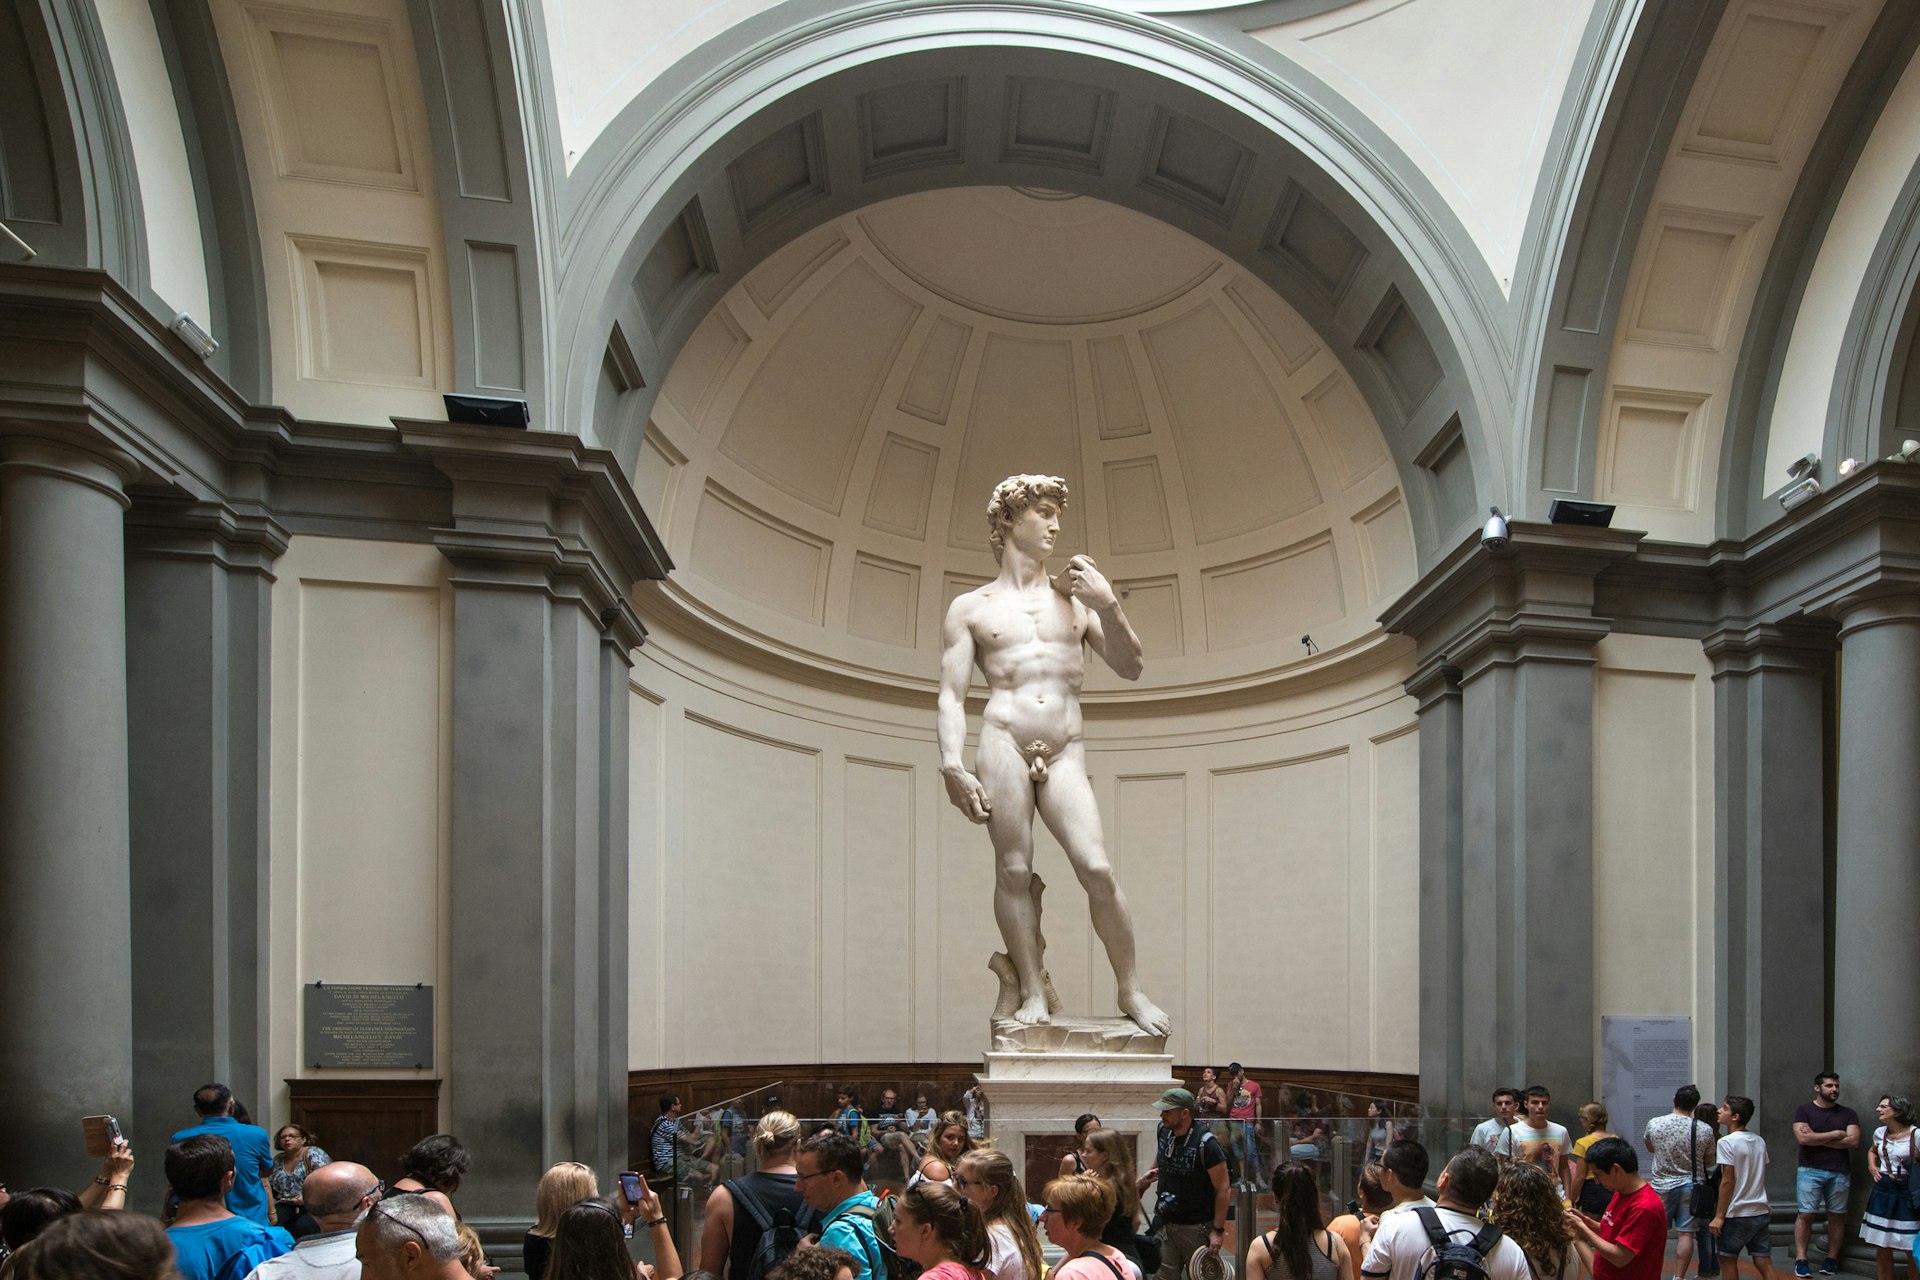 Crowds congregate in front Michelangelo’s David, displayed under stone arches and among columns at the Accademia di Belle Arti di Firenze